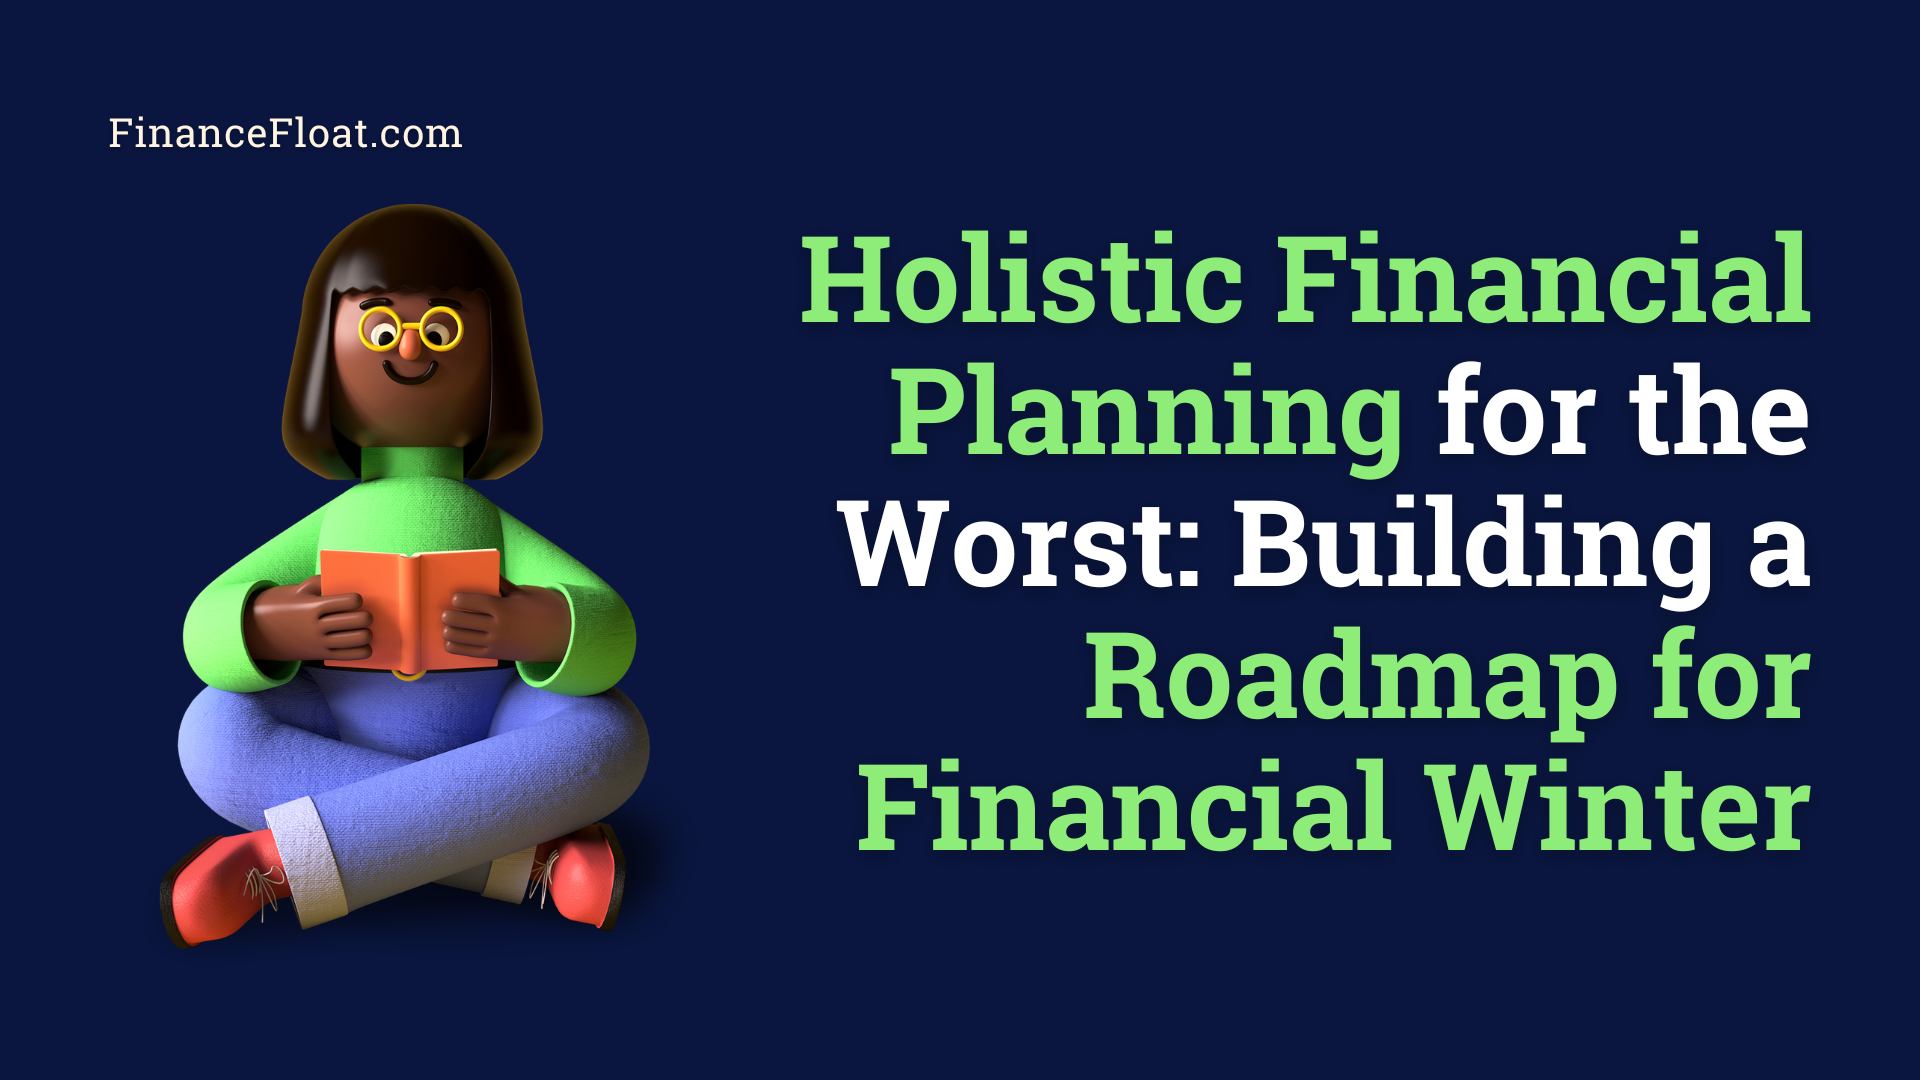 Holistic Financial Planning for the Worst Building a Roadmap for Financial Winter